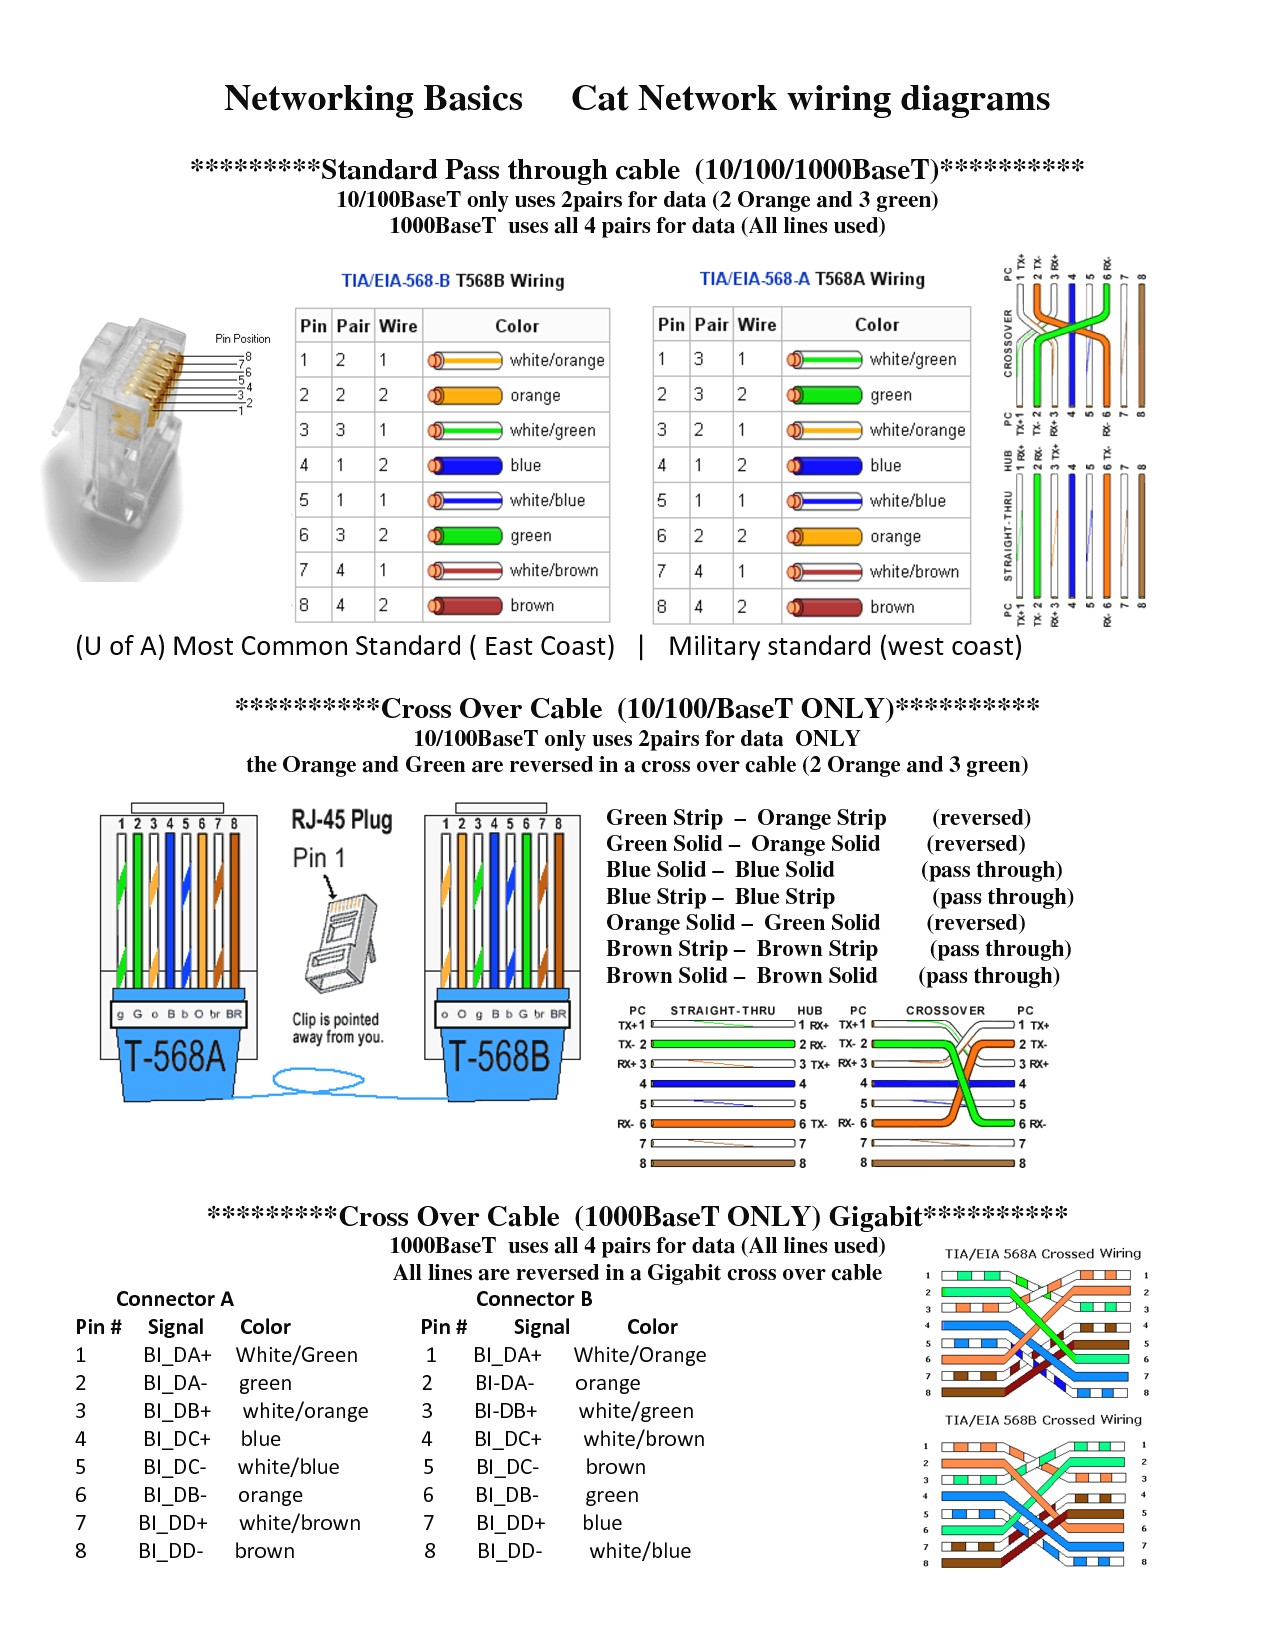 Cat5 Connector Wiring Diagram Best Cat5 Plug Wiring Diagram Gallery Everything You Need to Know Of Cat5 Connector Wiring Diagram